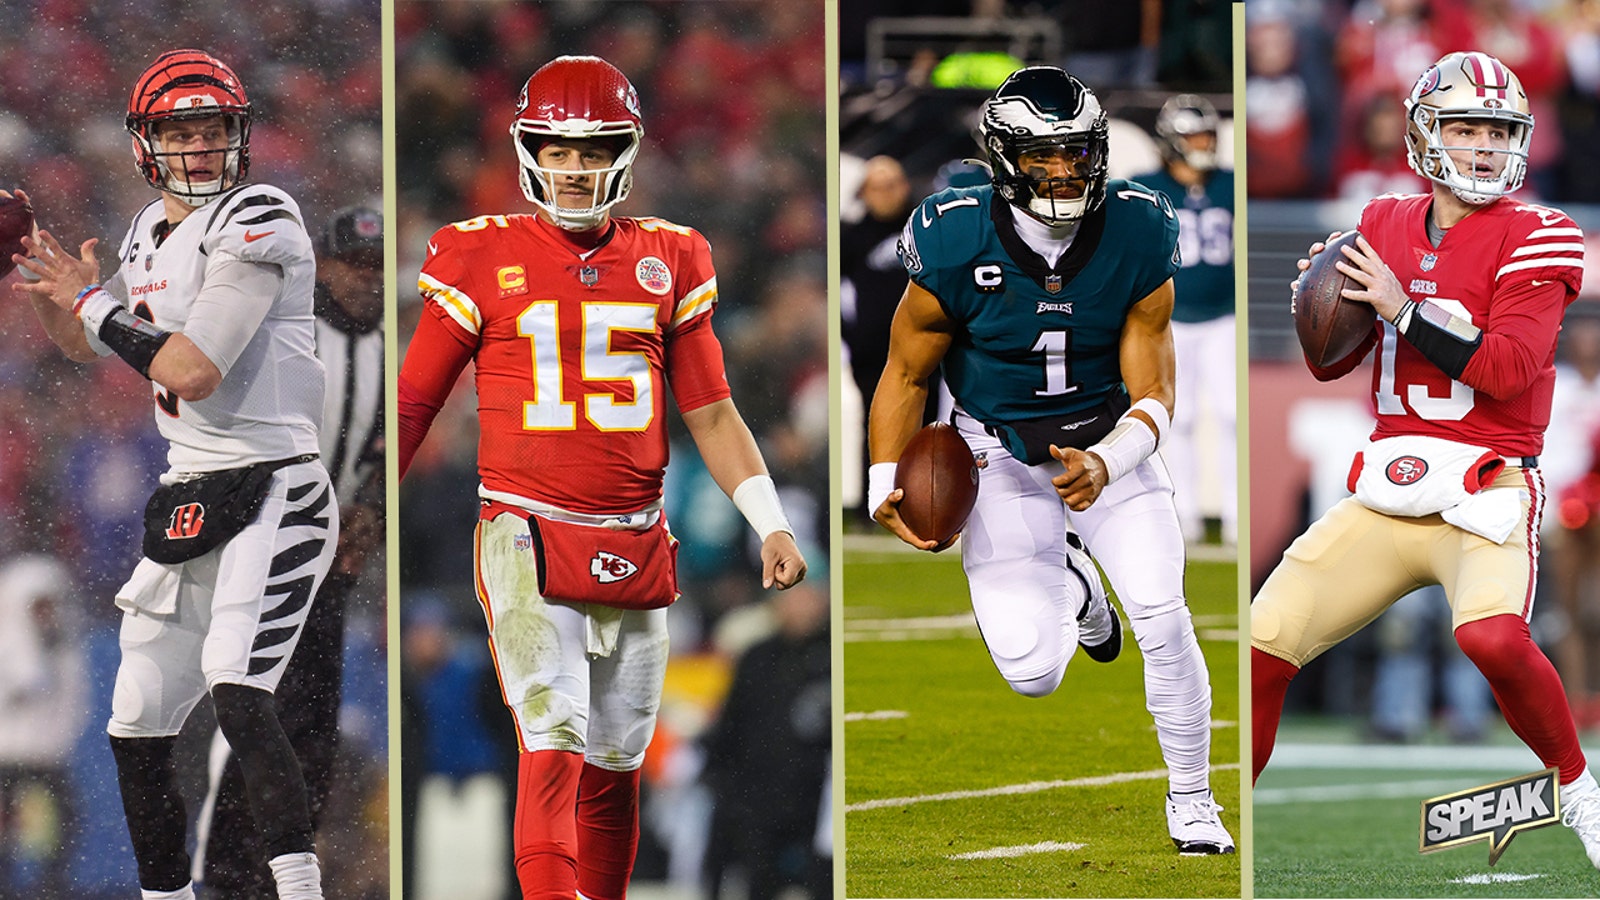 Does Burrow, Mahomes, Hurts or Purdy have the most to gain from a SB run?